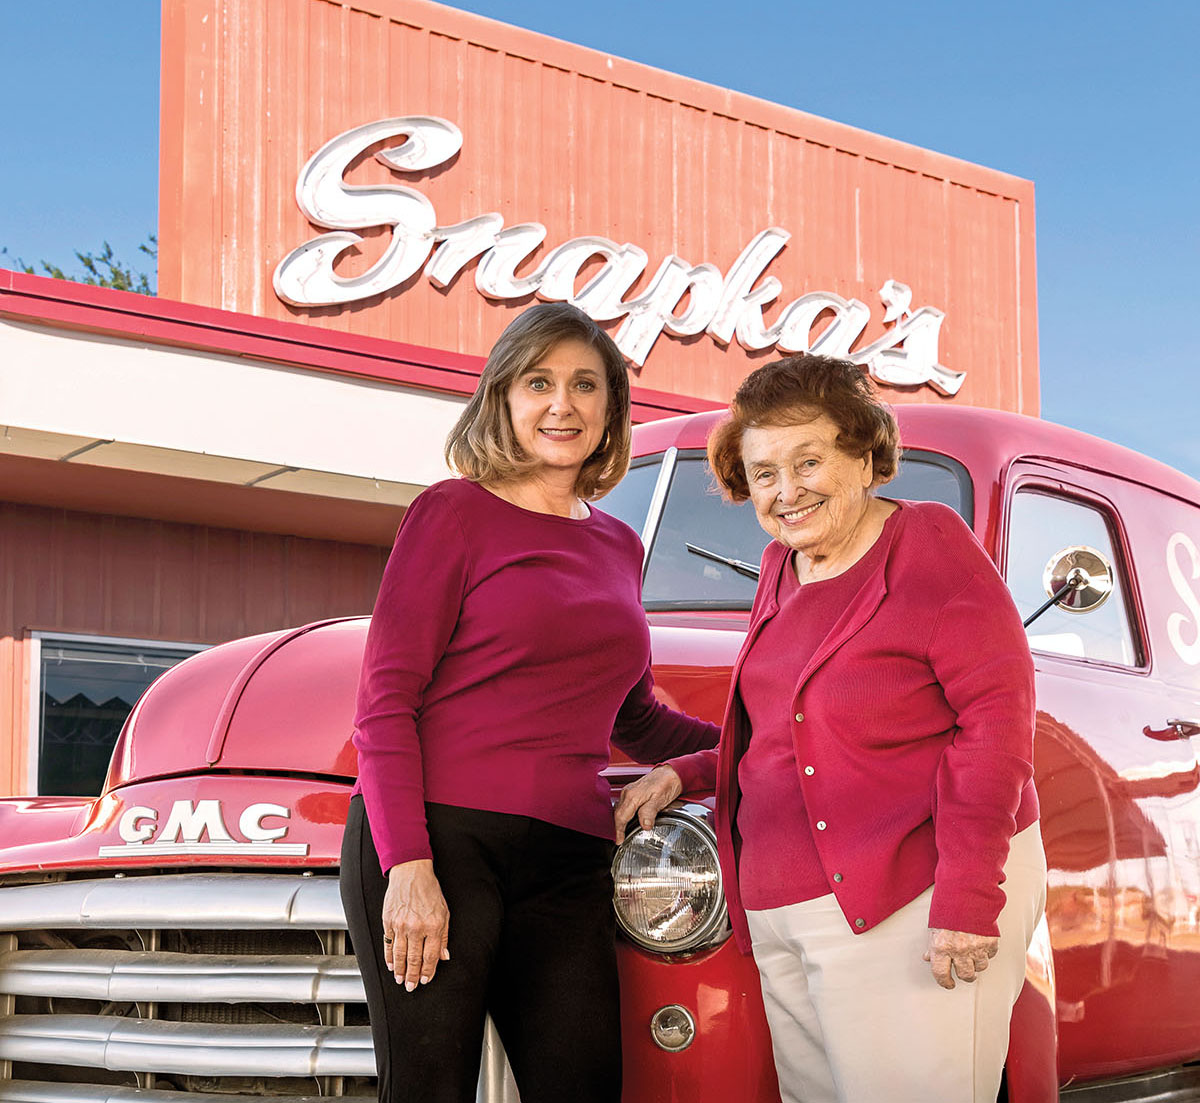 Two women in red shirts stand in front of a bright red GMC truck and a sign reading "Snapka's"